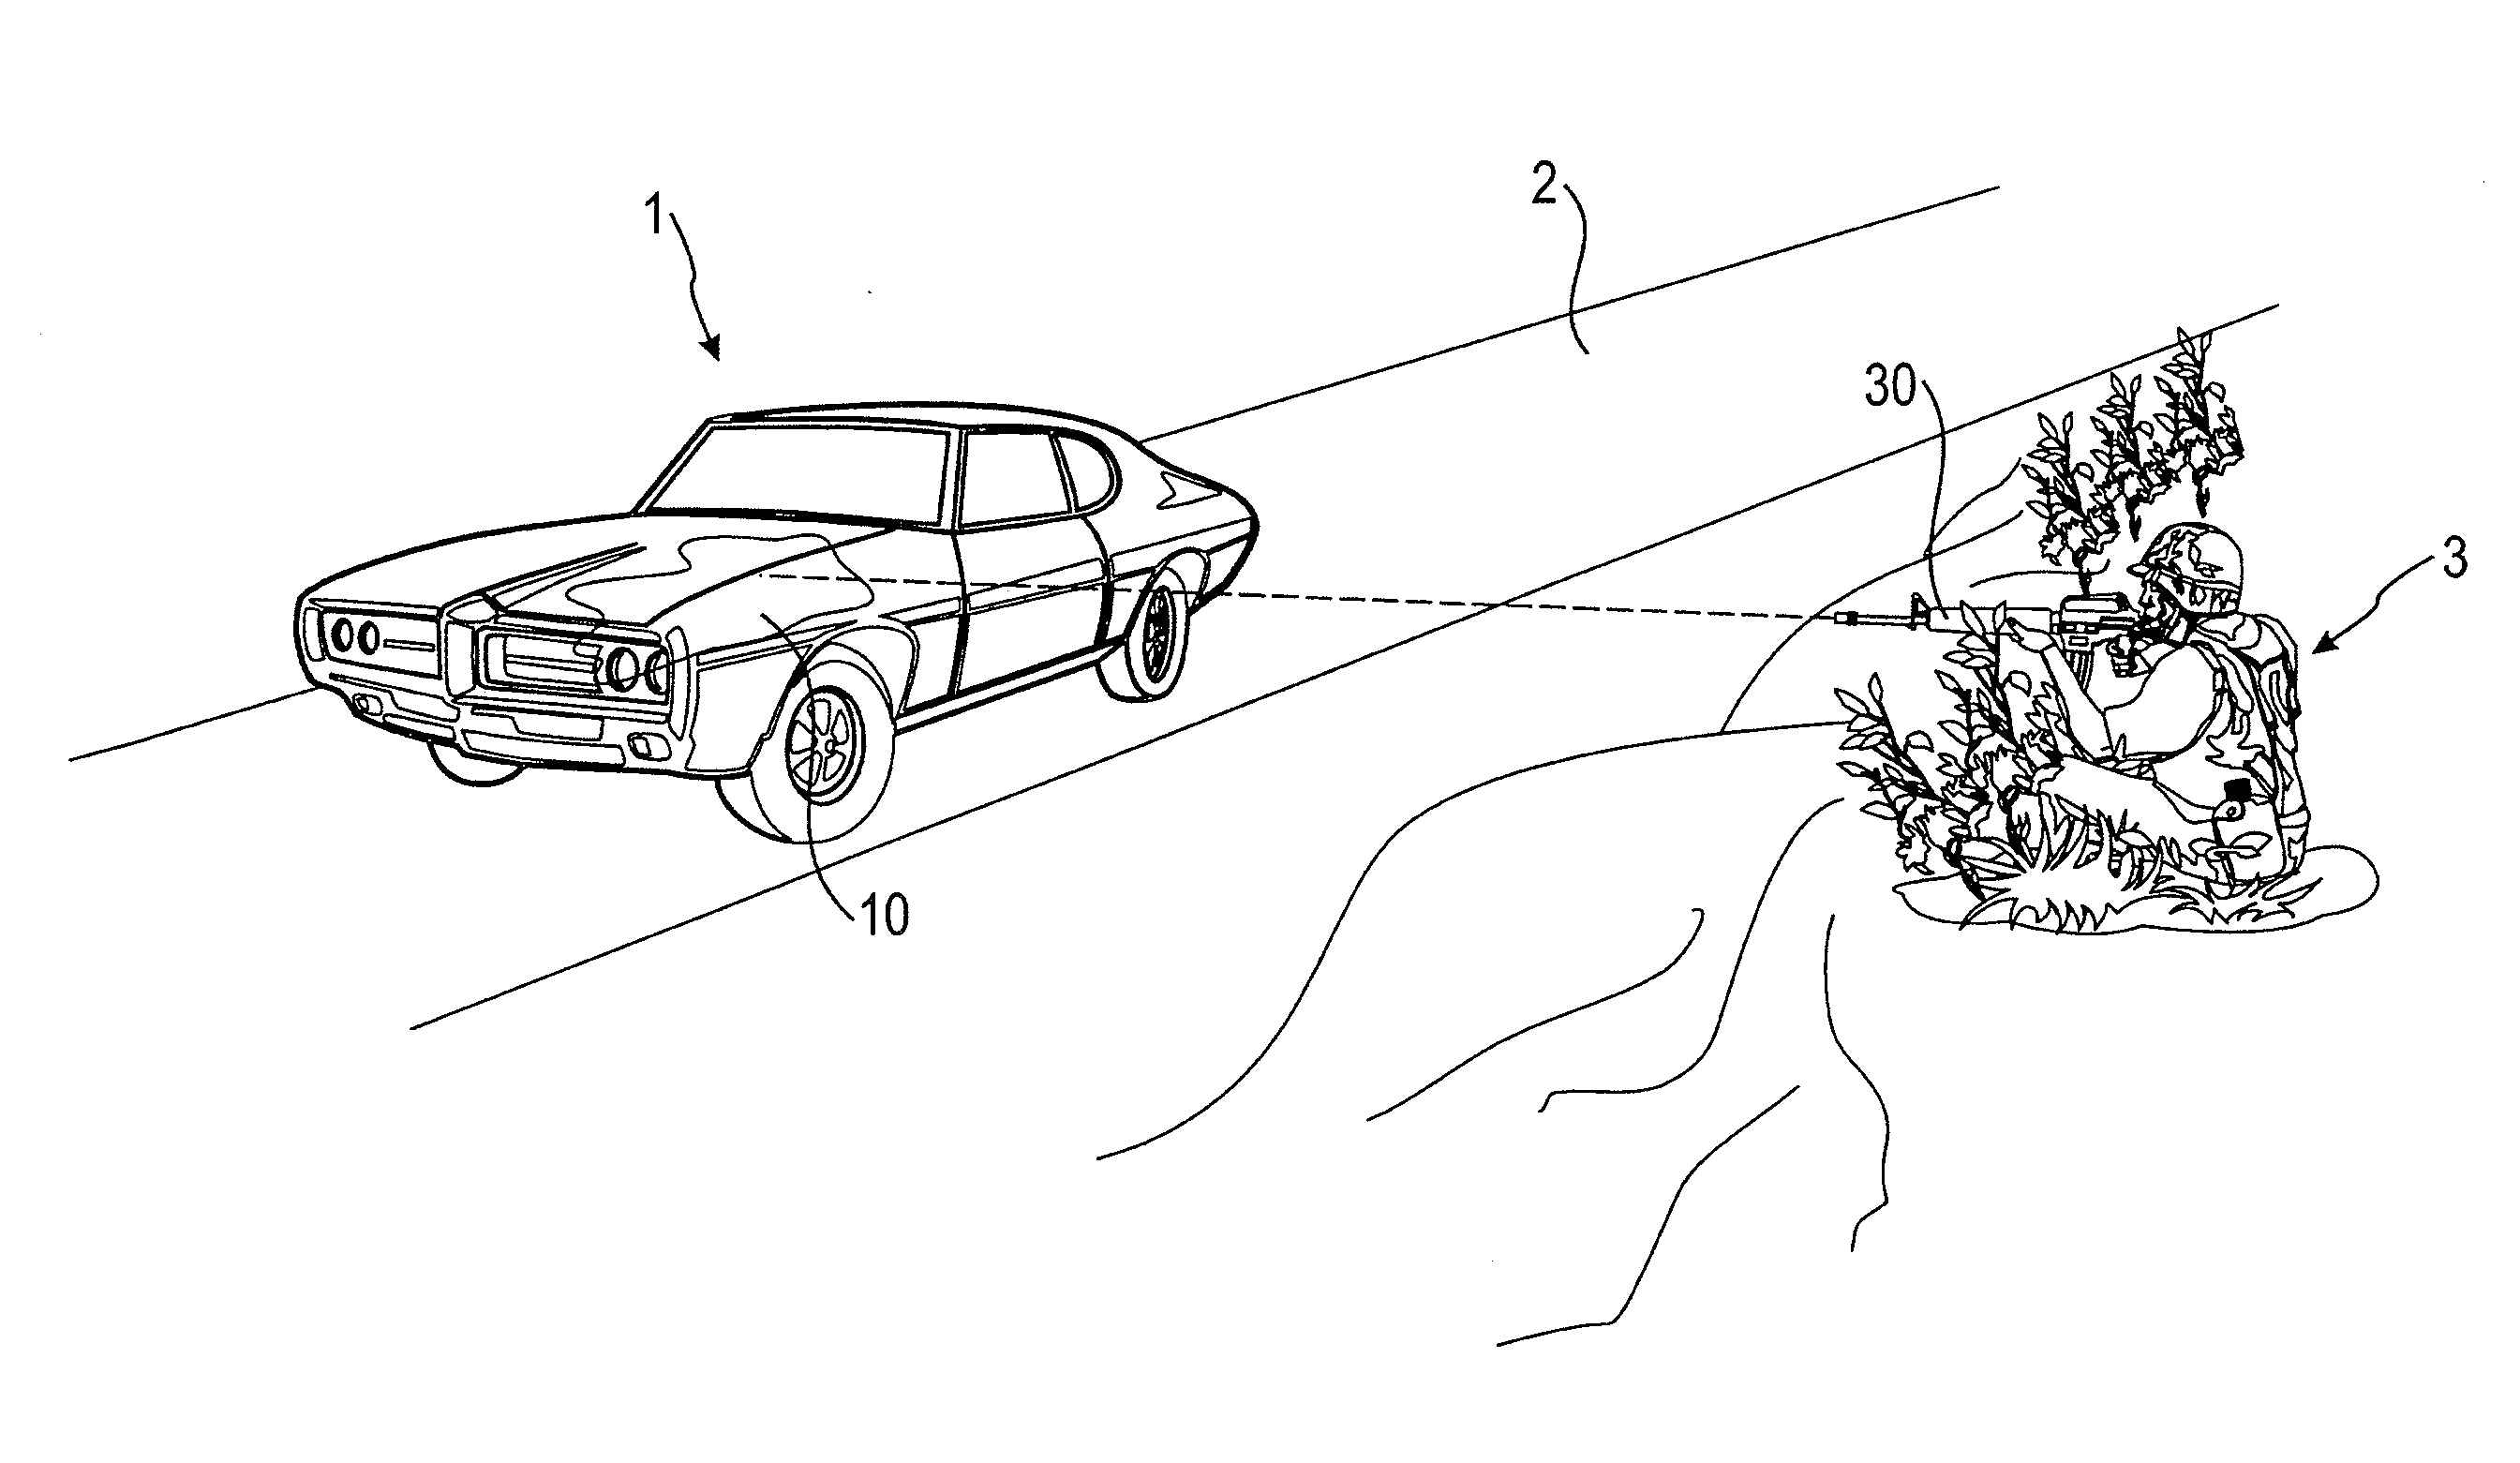 Method and Device for Tracking a Moving Target Object